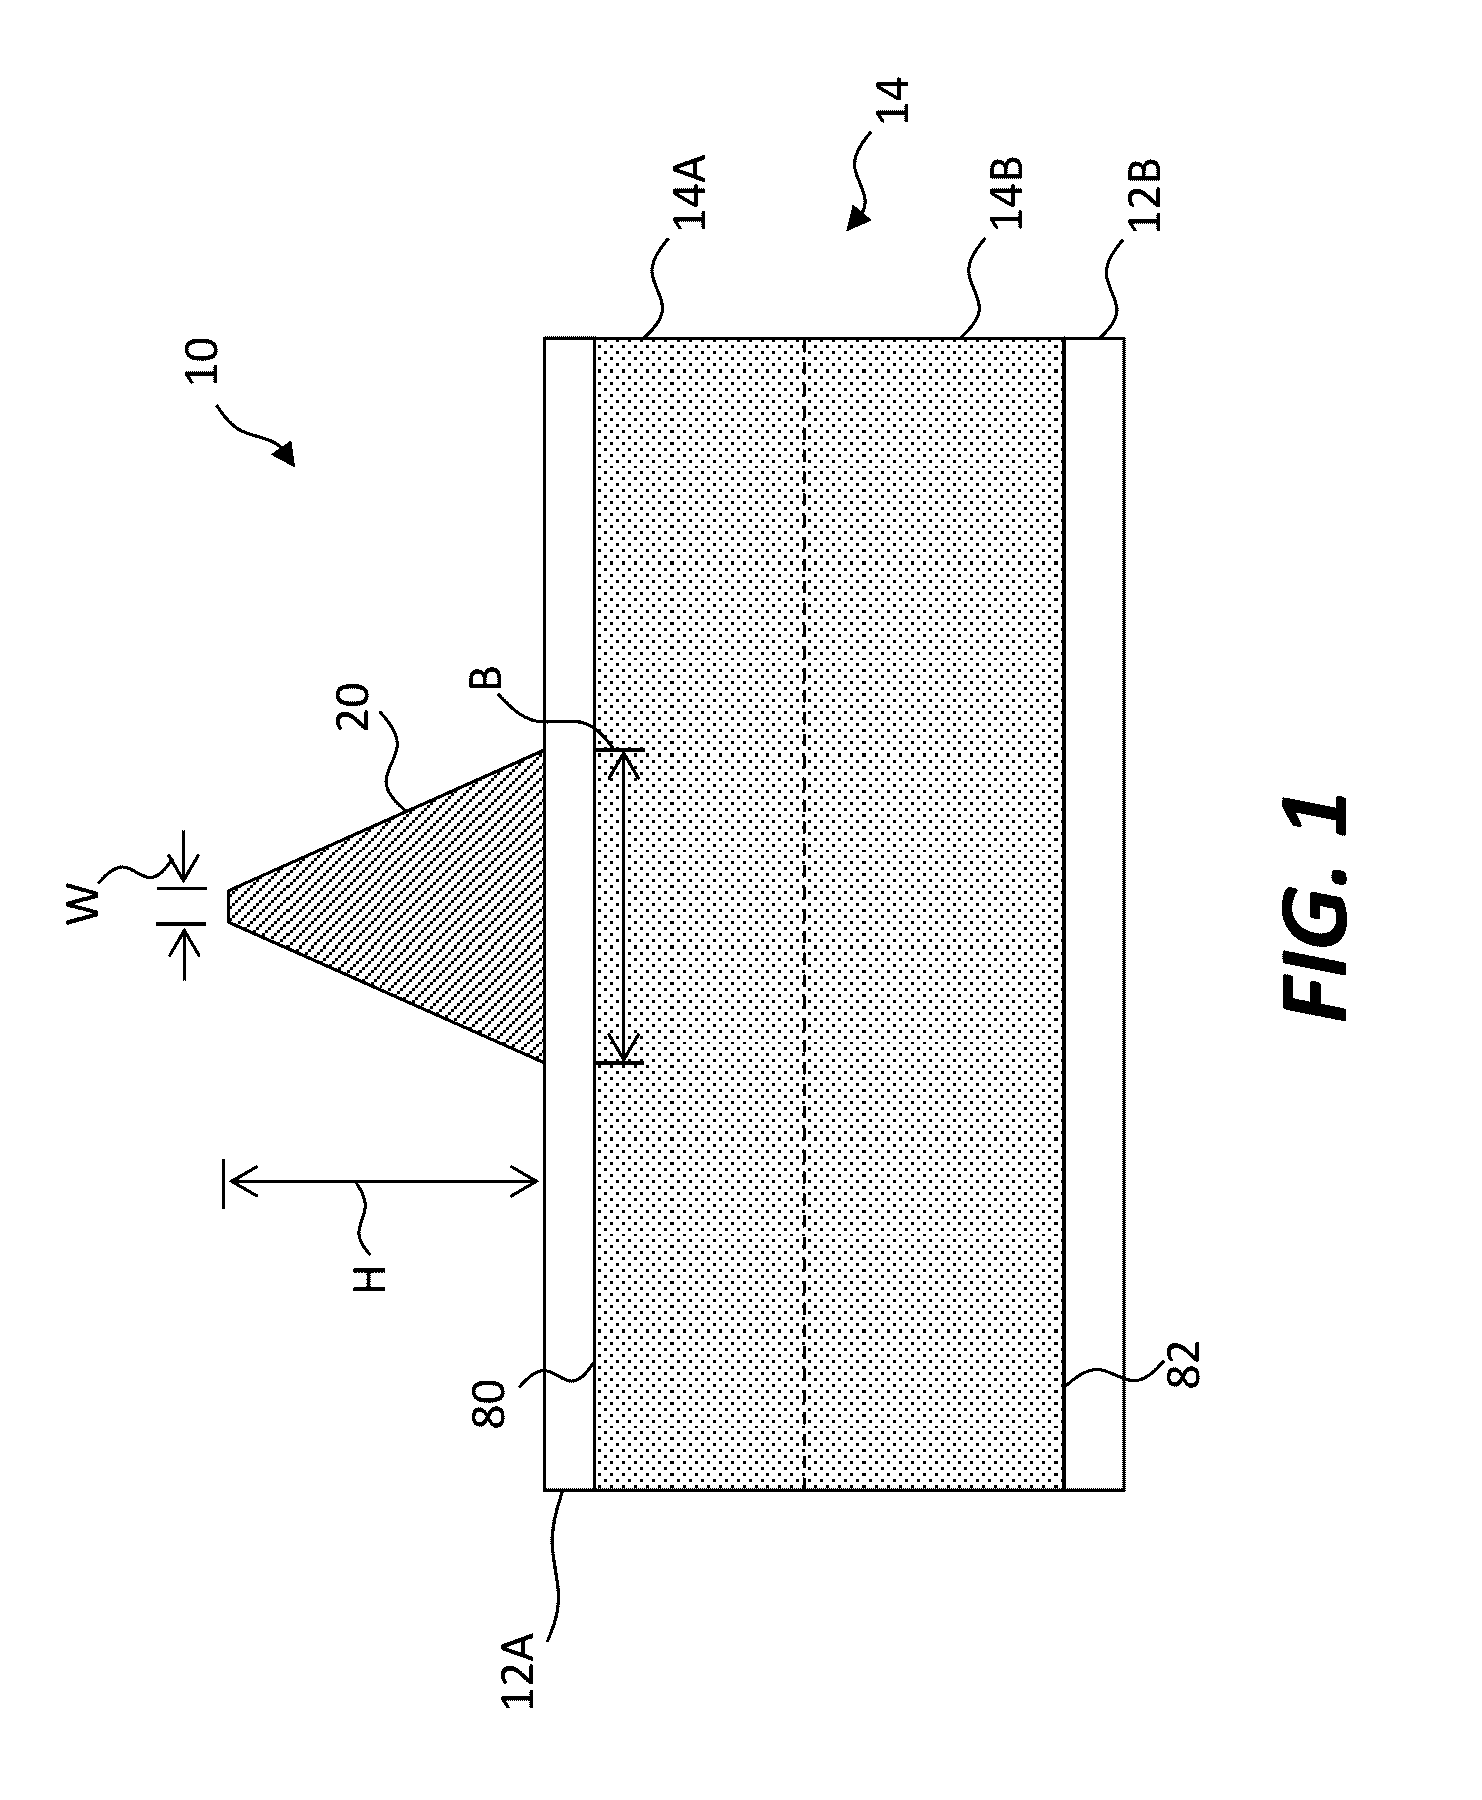 Printable component structure with electrical contact